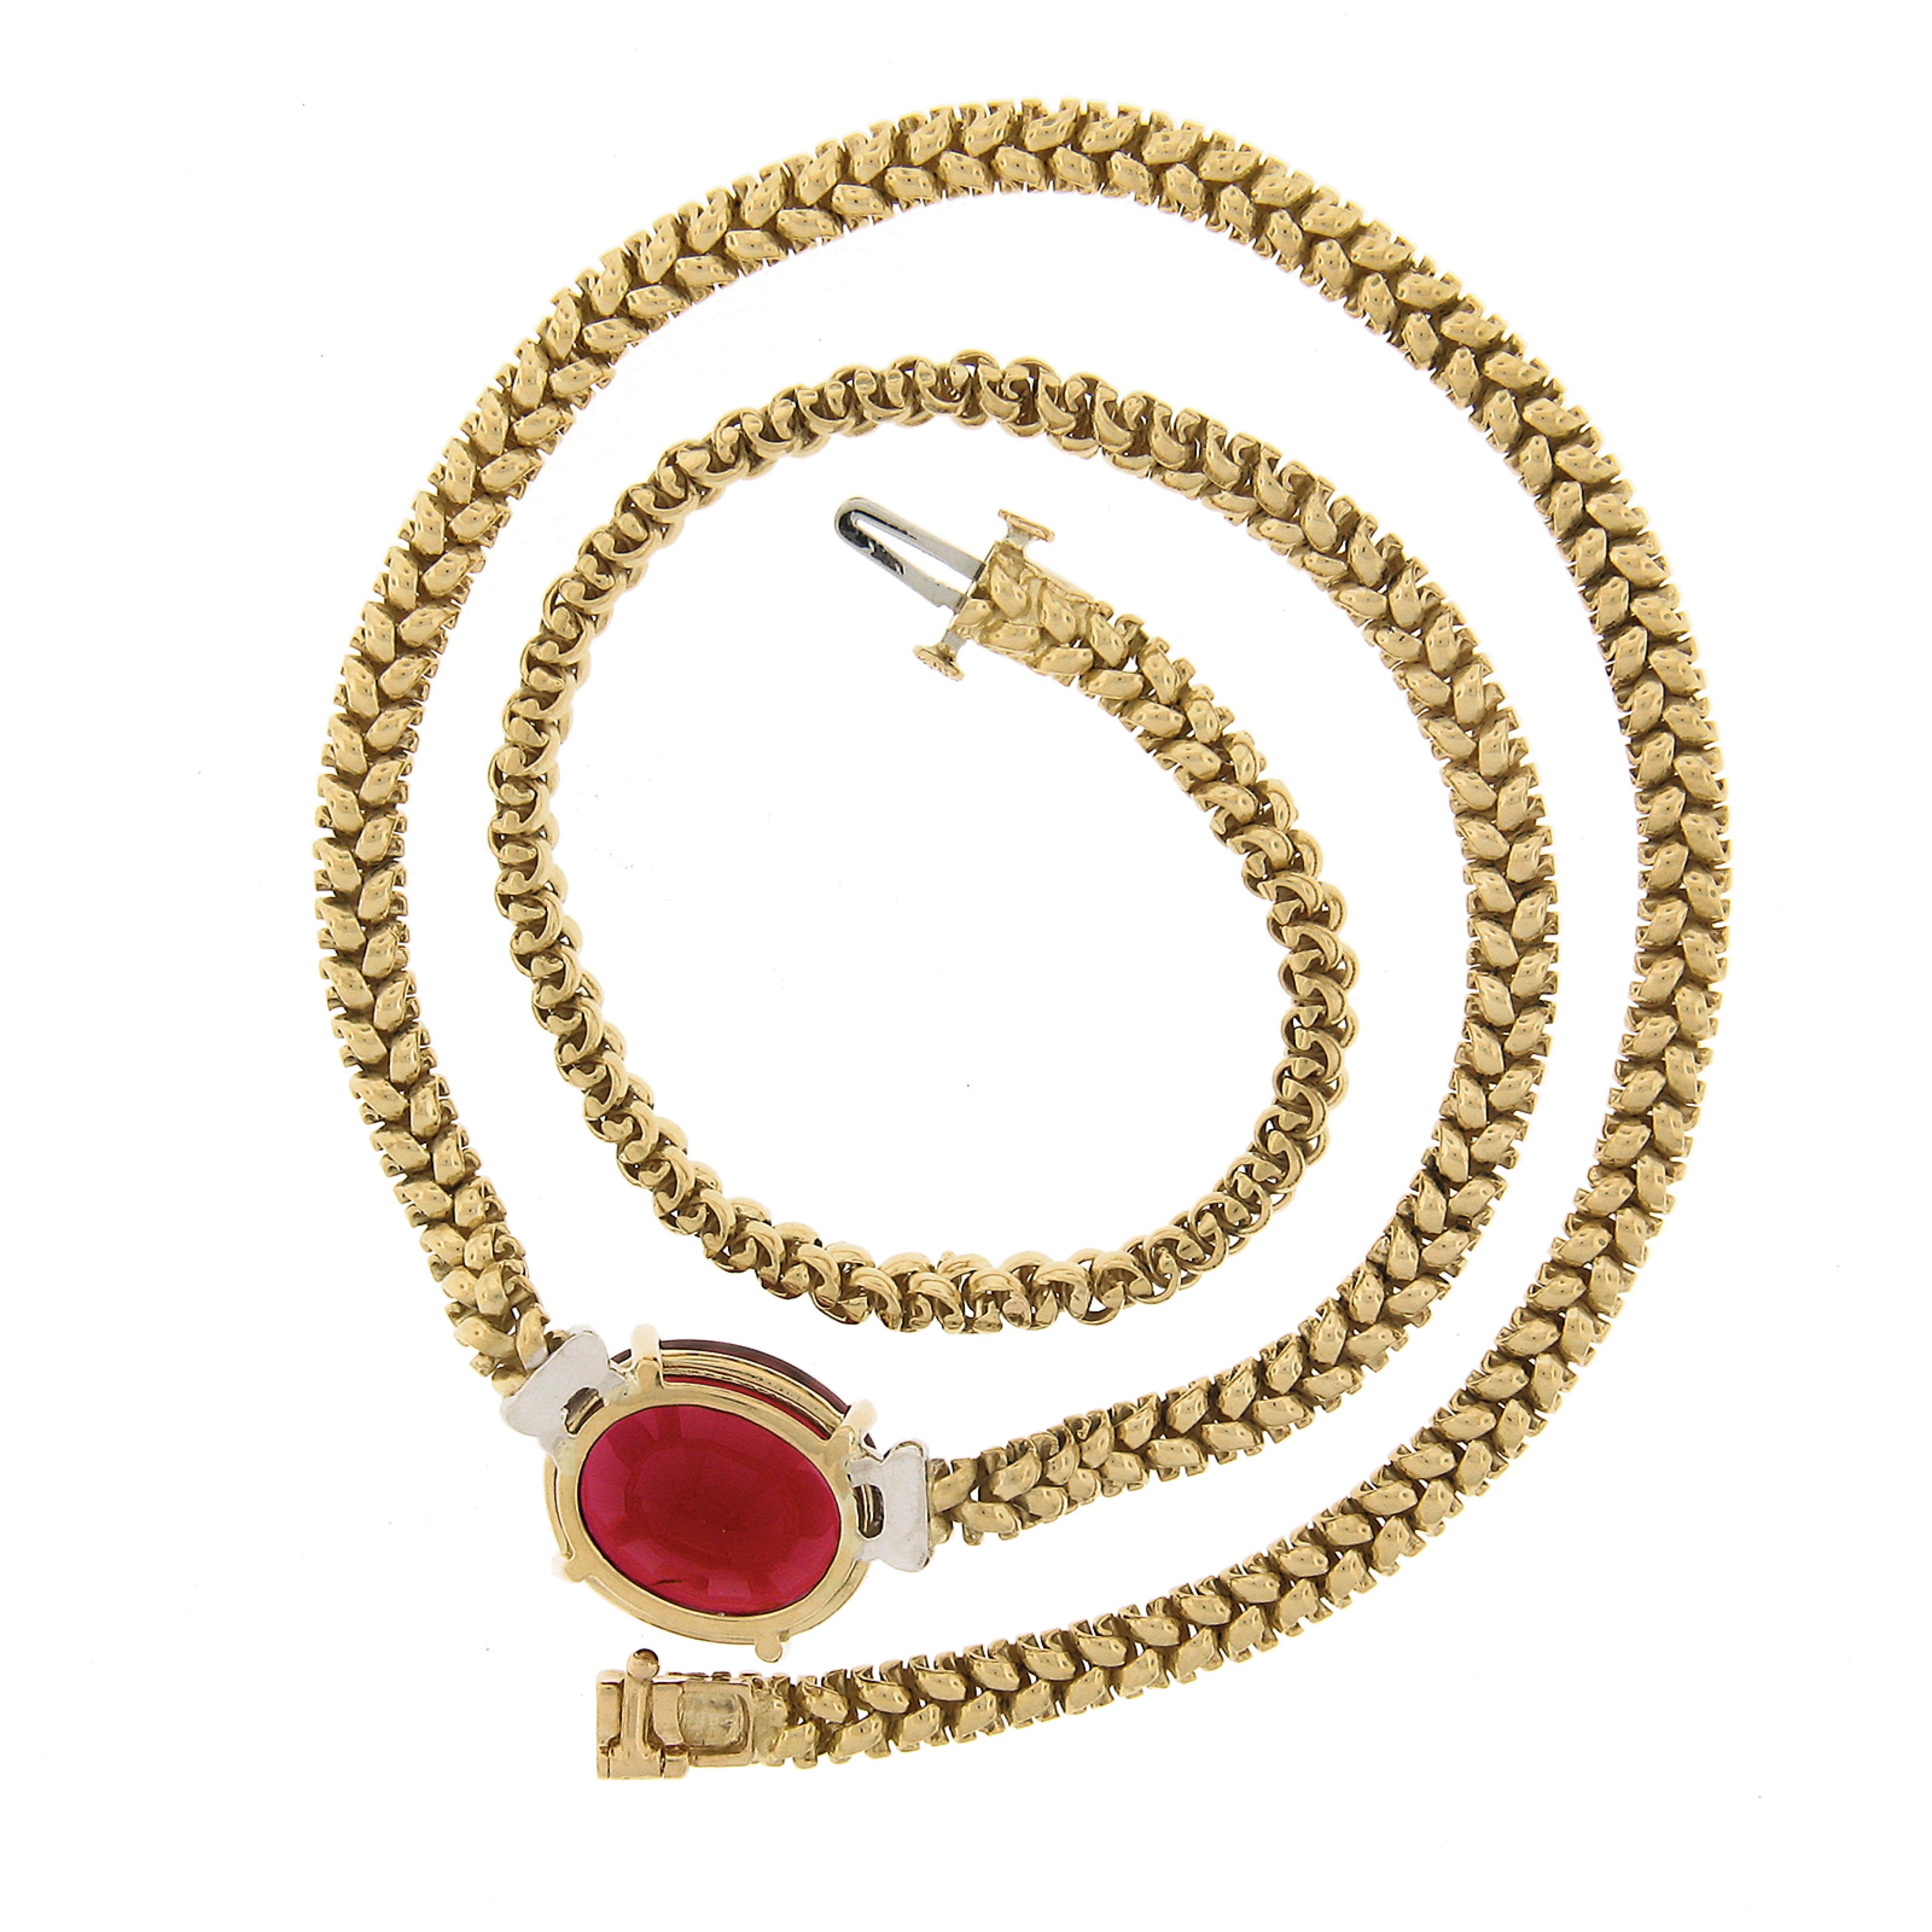 18k Two Tone Gold 12.82 Carat GIA Large Oval Red Rubellite Tourmaline Necklace In Excellent Condition For Sale In Montclair, NJ